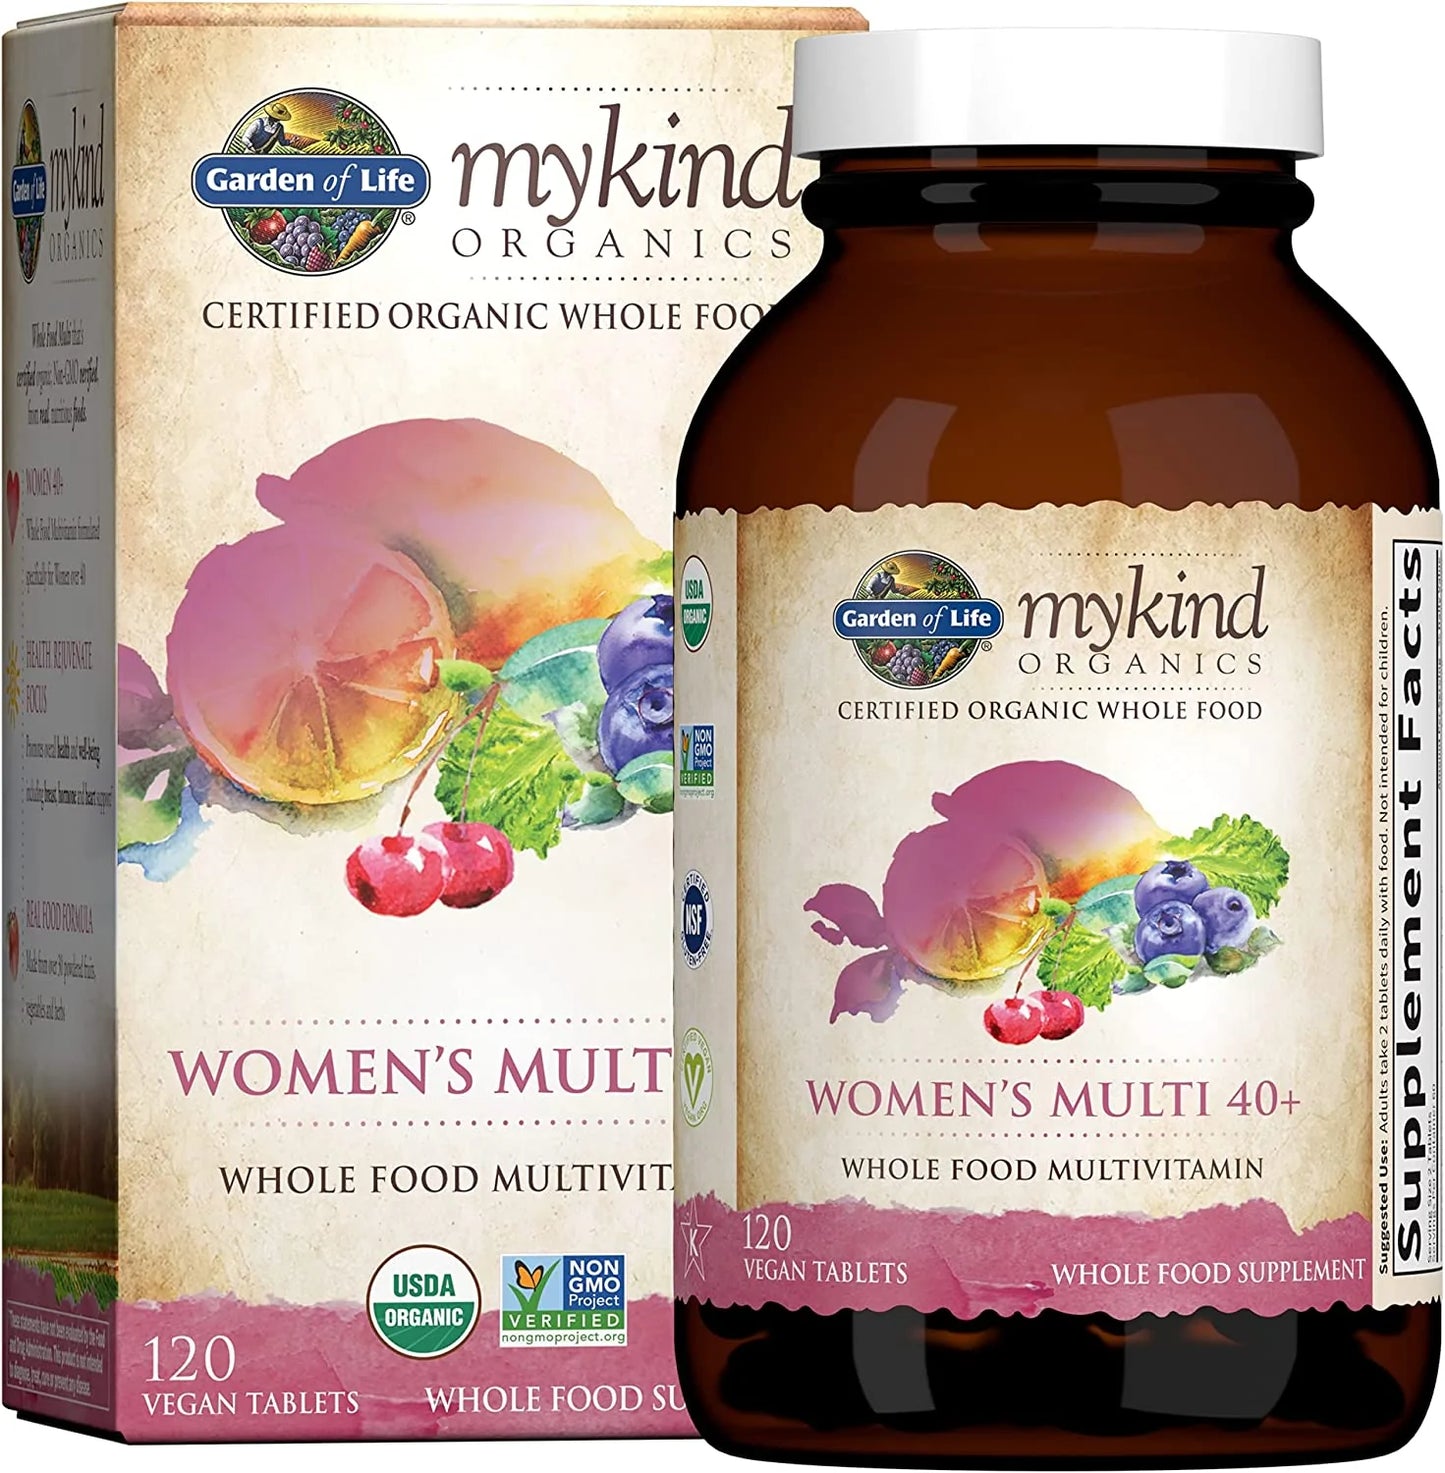 Garden of Life mykind Organics Vitamins for Women 40 Plus - 120 Tablets, Womens Multi 40 Plus, Vegan Vitamins for Women Over 40, Hormone & Breast Health Support Blend, Whole Food Womens Multivitamin